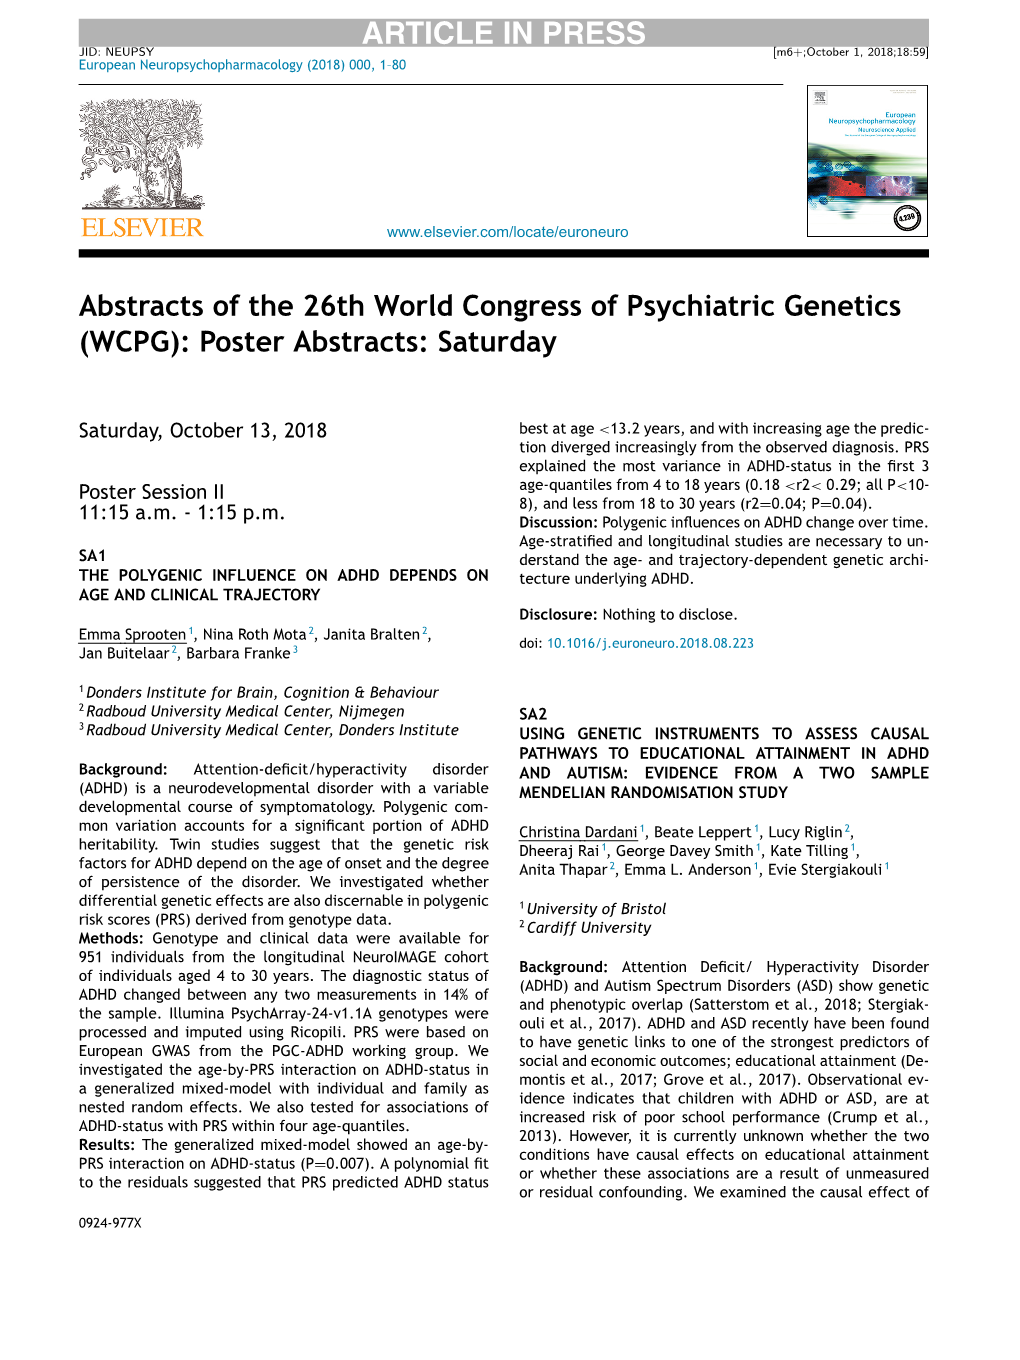 (WCPG): Poster Abstracts: Saturday